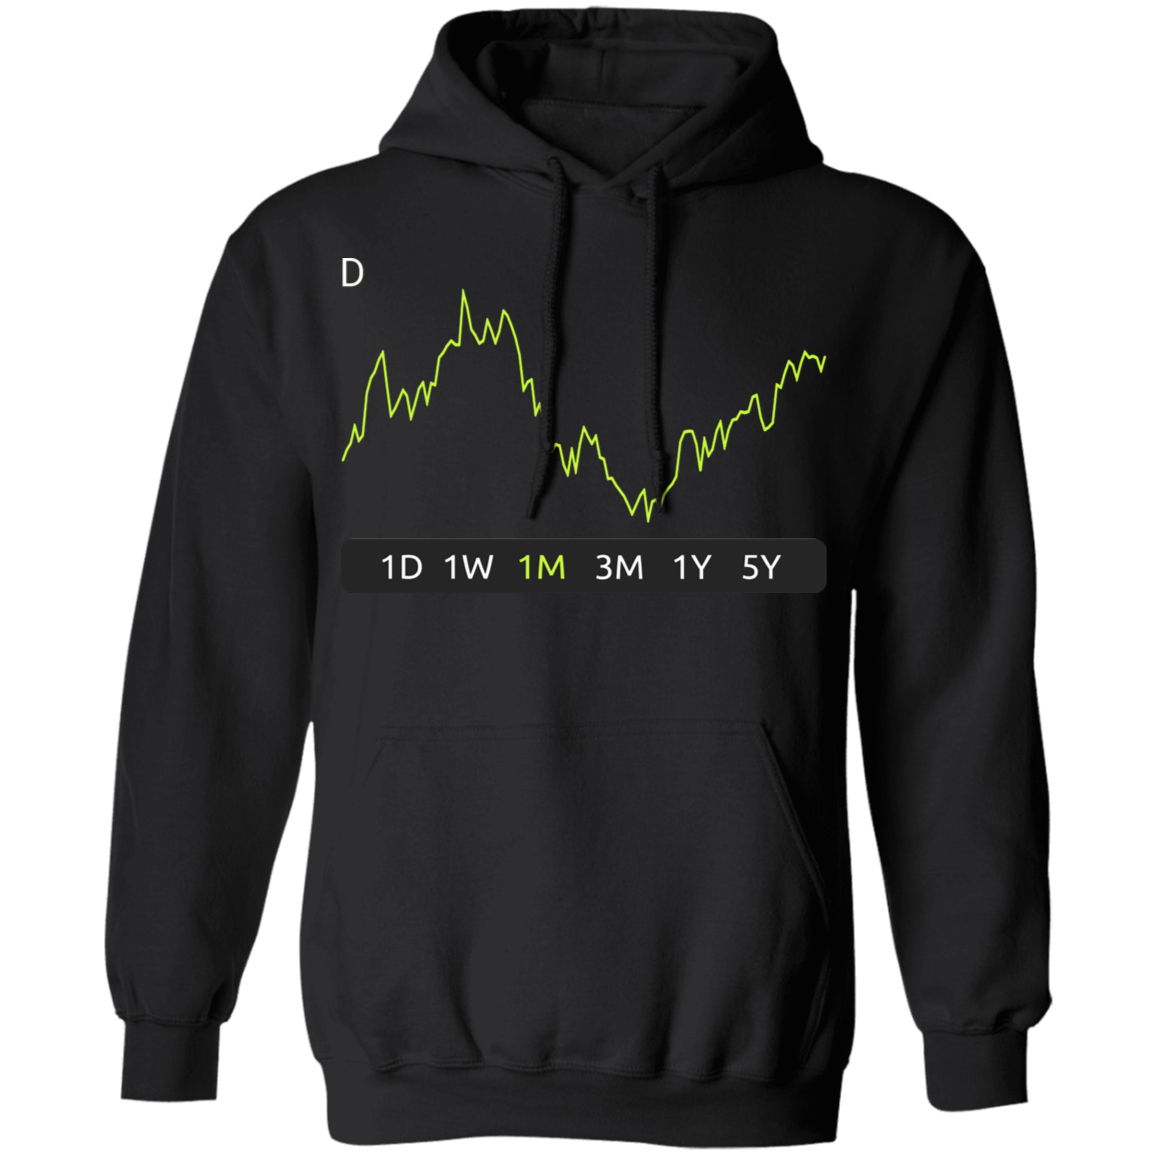 D Stock 1m Pullover Hoodie